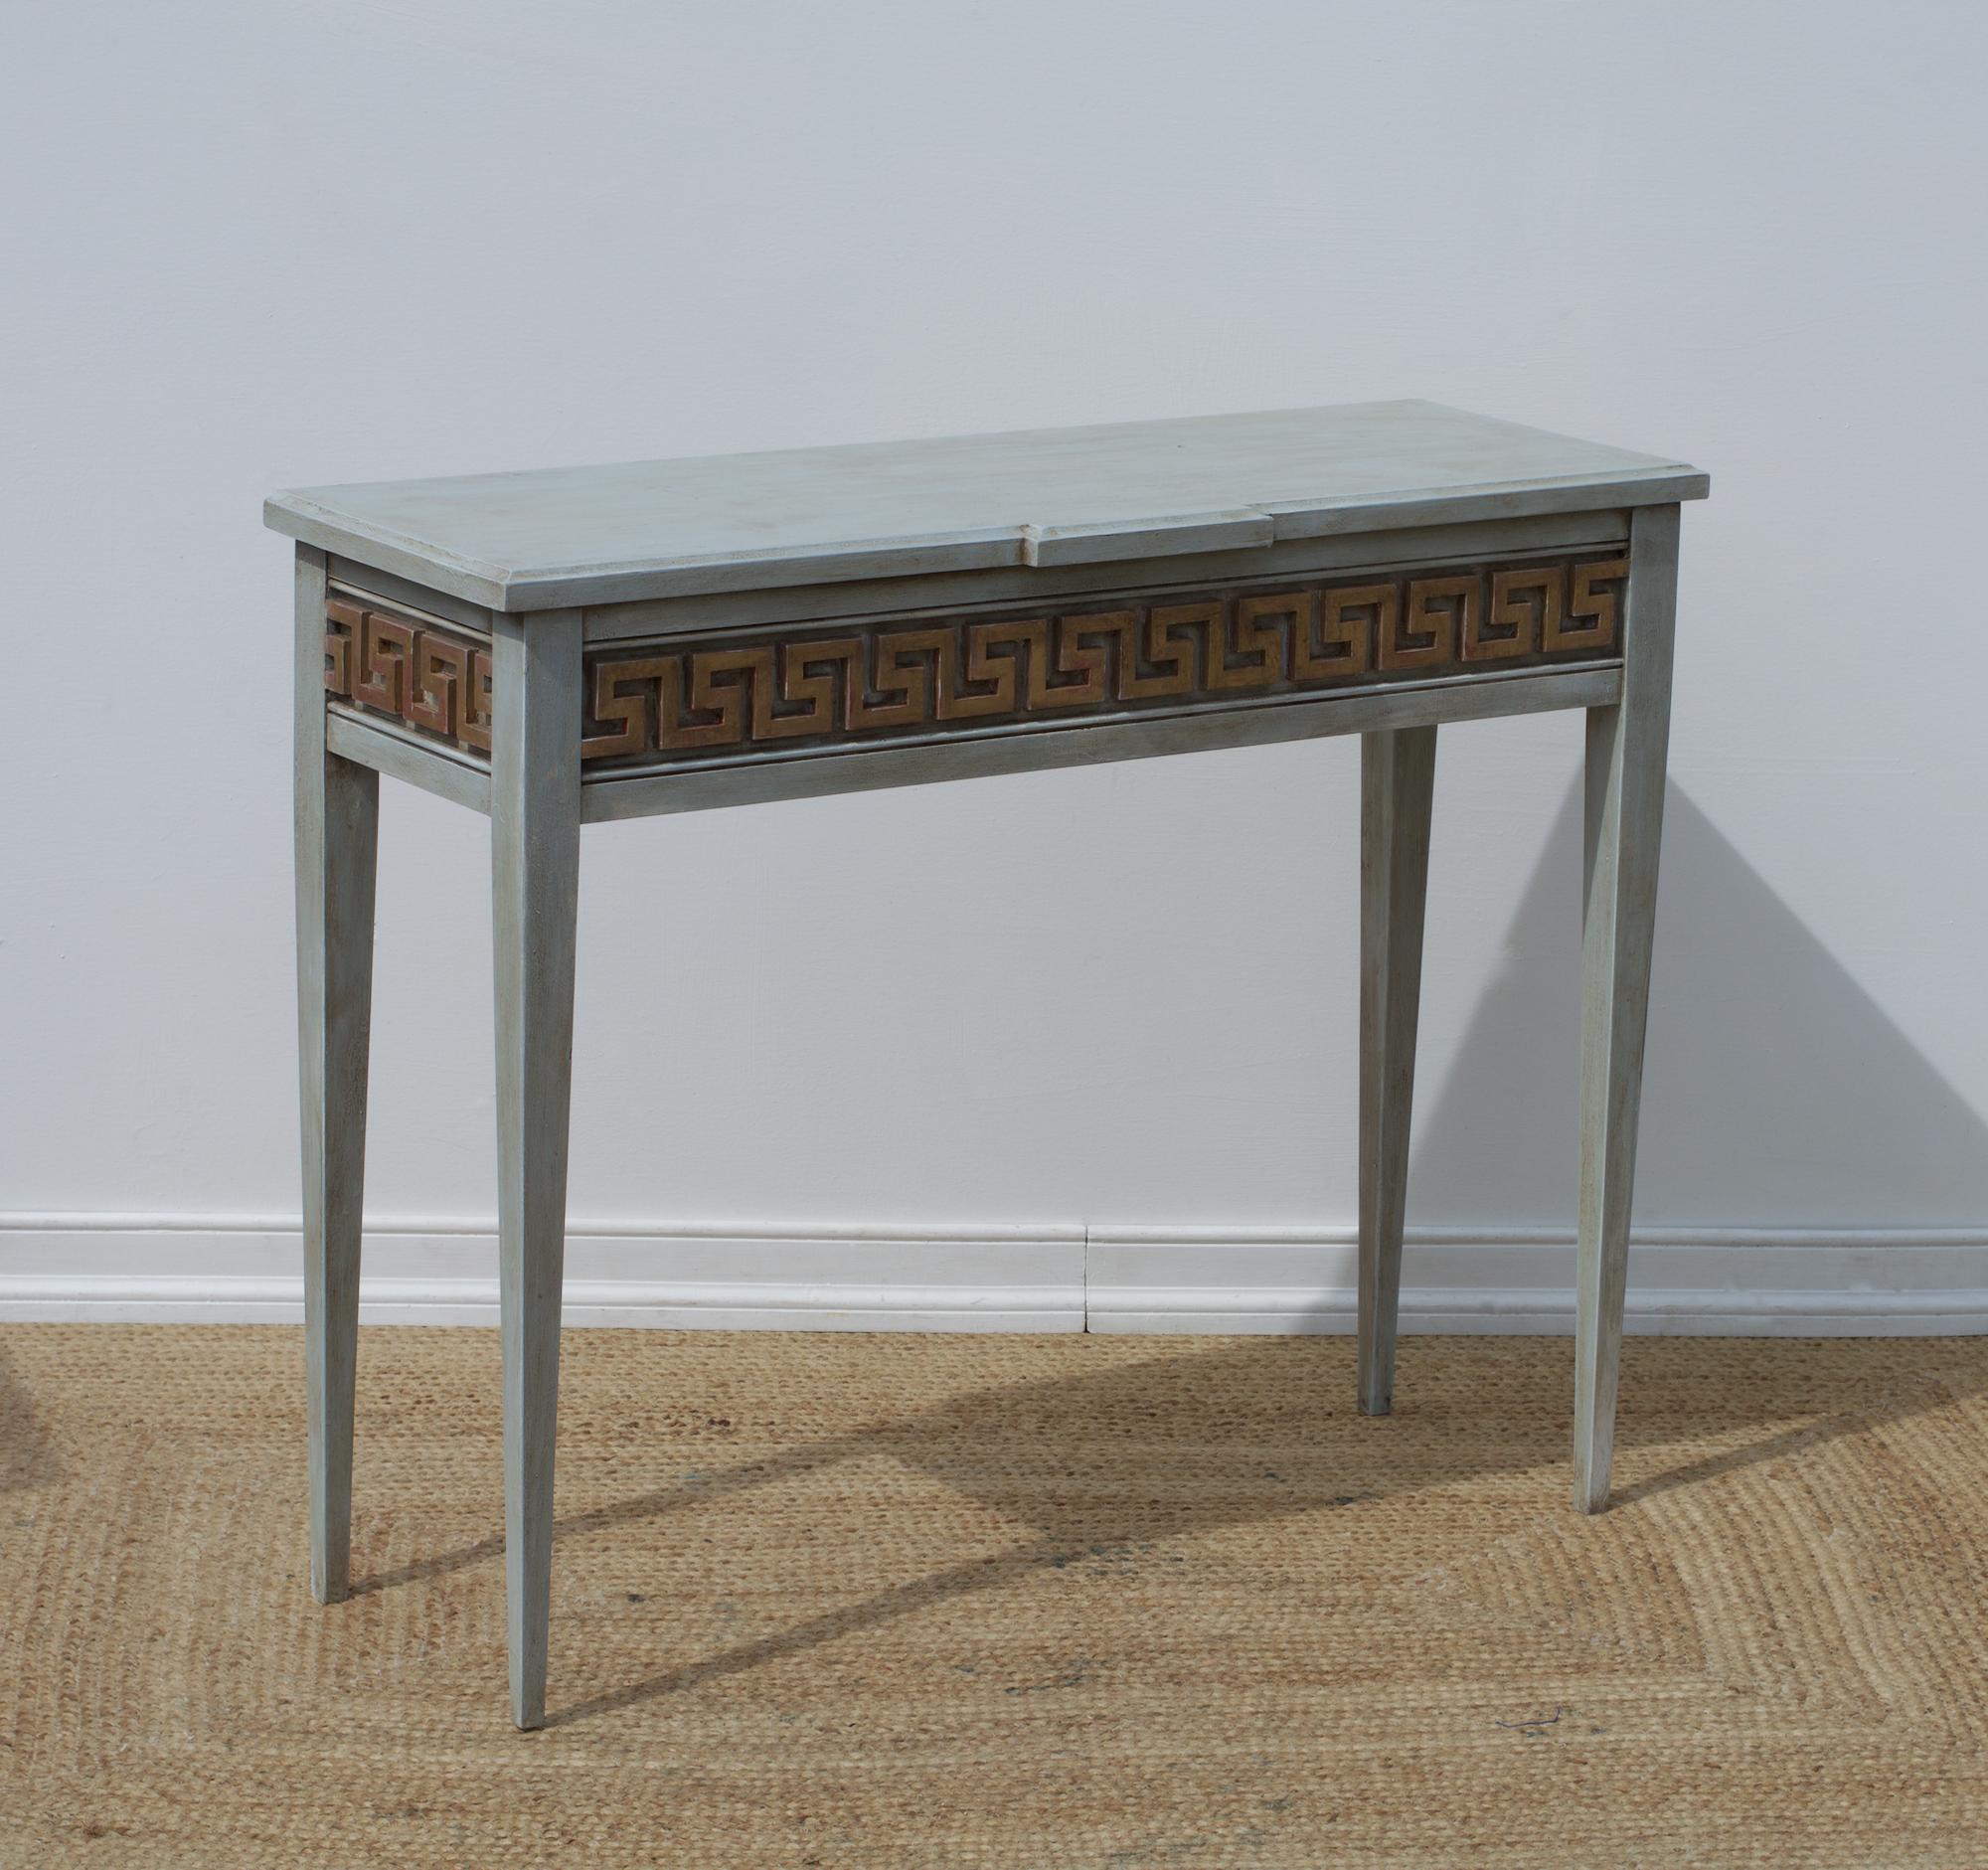 A smart looking console table having neoclassical bones and a fetching Greek key paneled and gilt detail. Each table is bench made by hand in Virginia and constructed with pride. The custom and modular table can be ordered to your exact size and